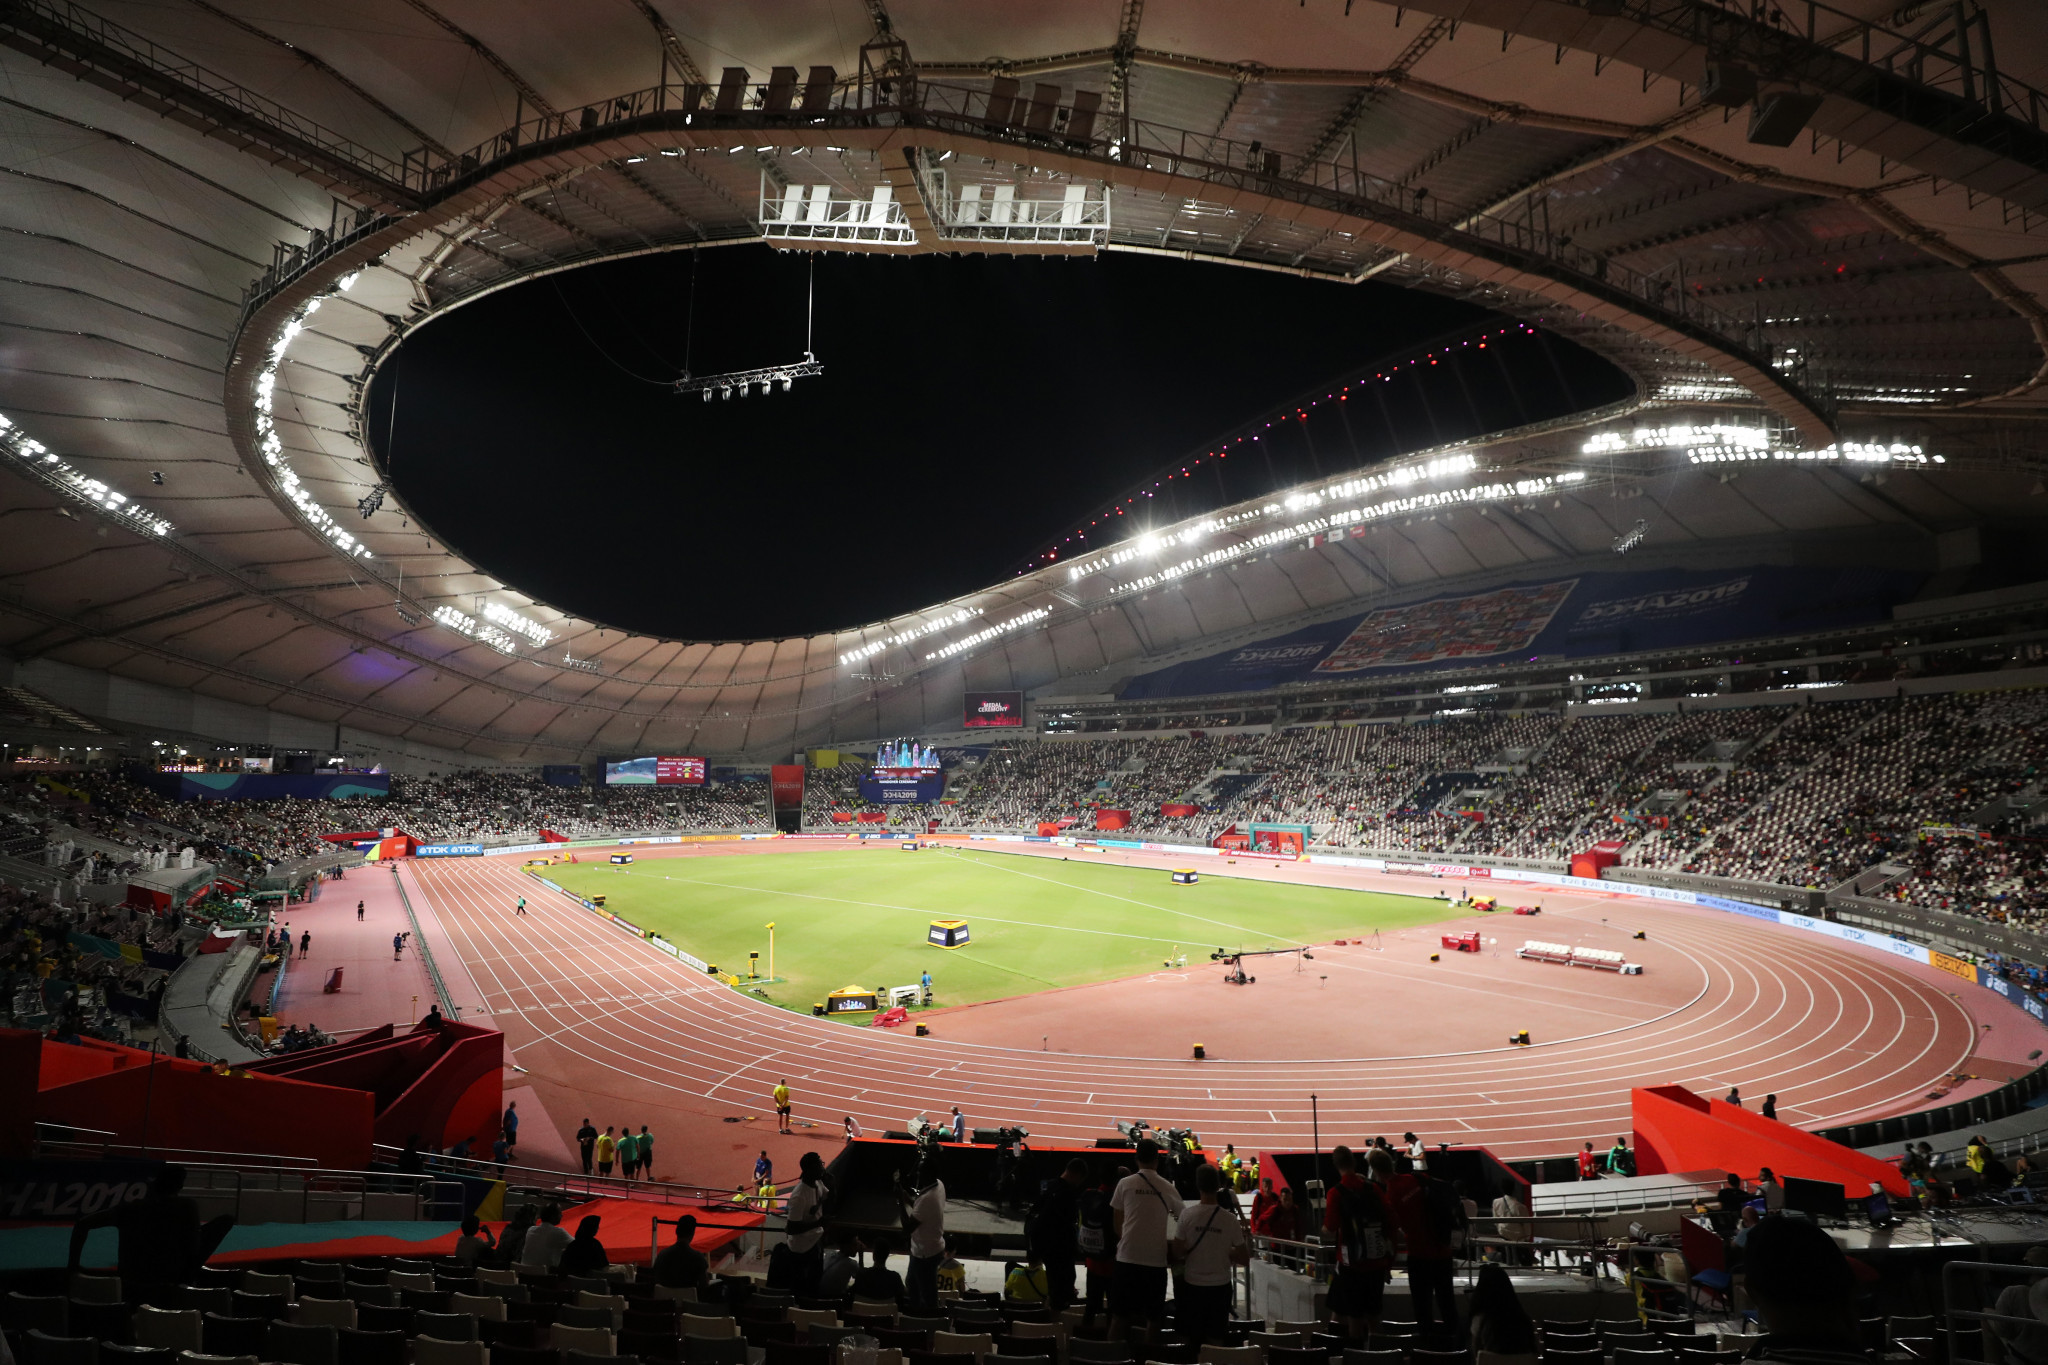 The Khalifa International Stadium will act as the main venue for the Doha 2030 Asian Games ©Getty Images